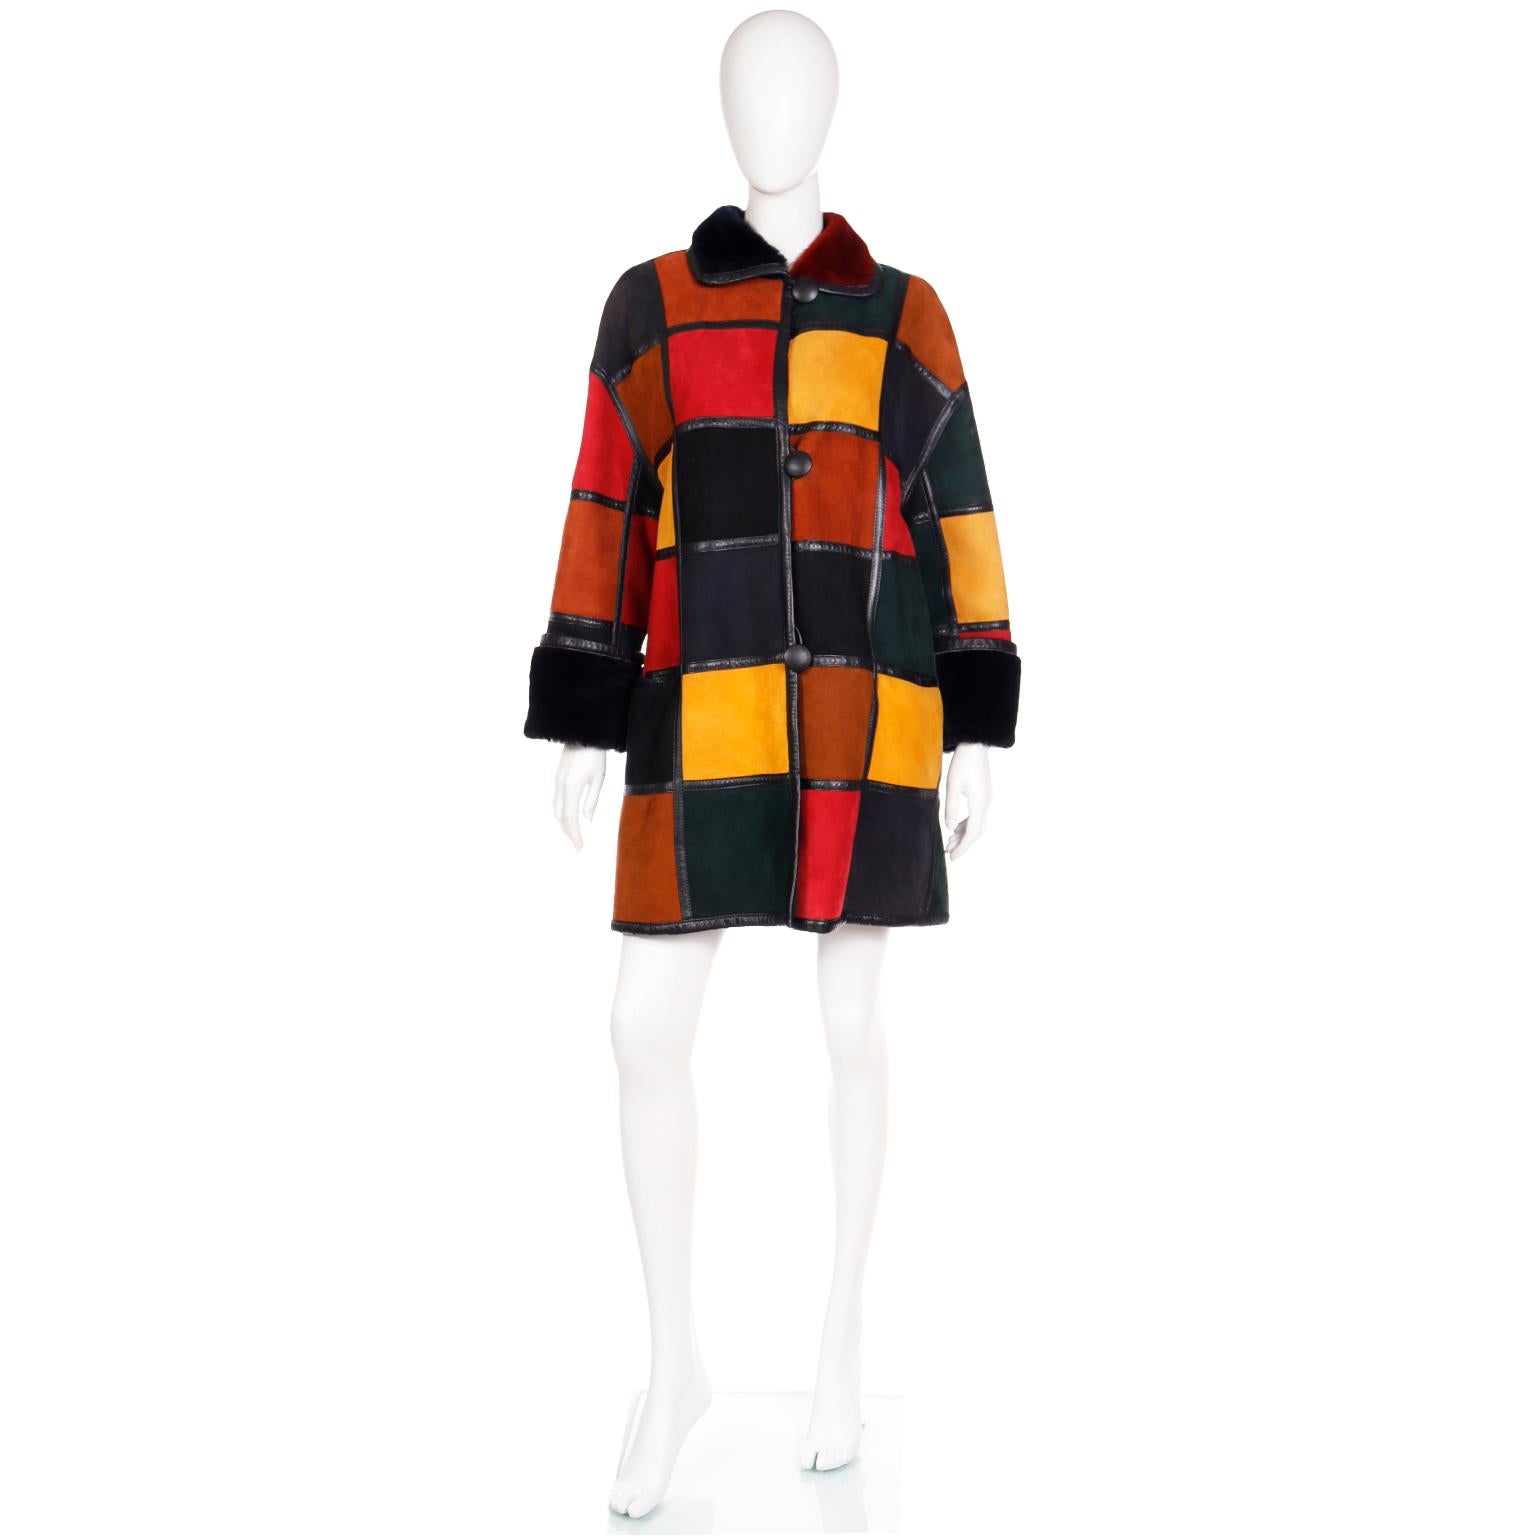 This breathtaking vintage Donna Karan coat is in a patchwork style with blocks of color in shades of rusty orange, red, black and yellow, defined by black leather. trim. One side of the coat is in a luxurious lamb shearling and the other is in a